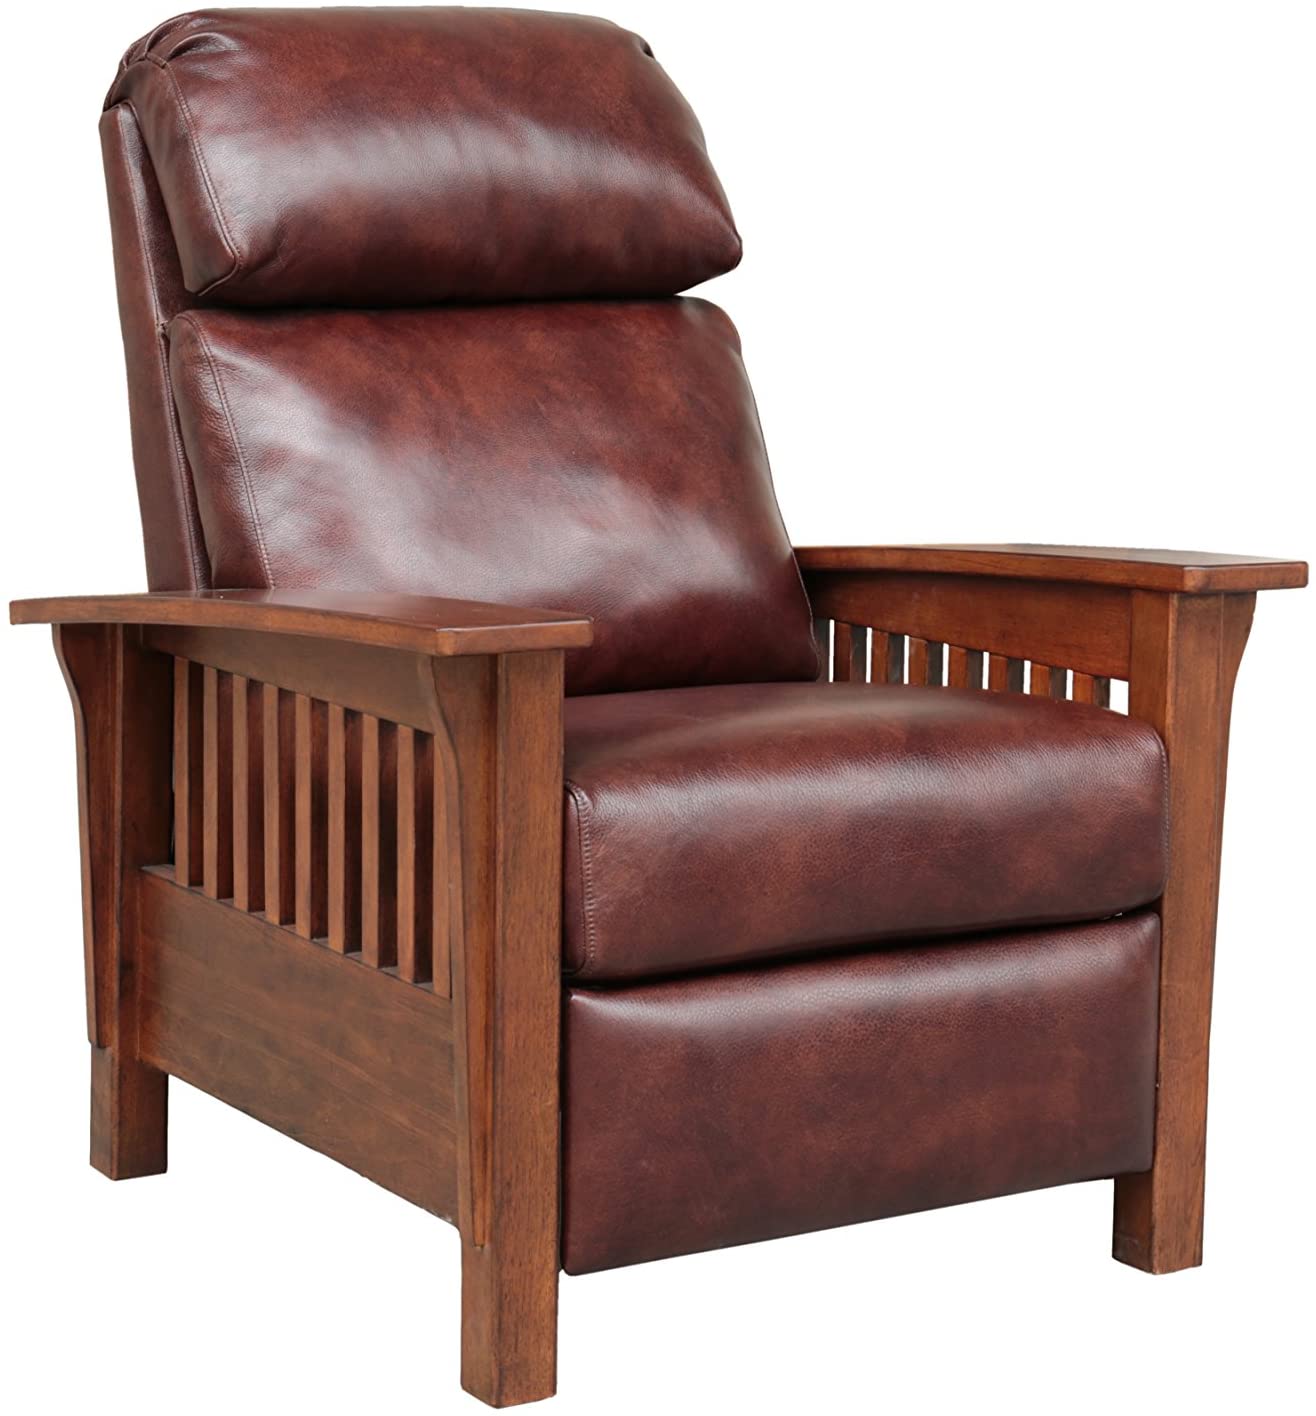 BarcaLounger Mission Recliner Chair